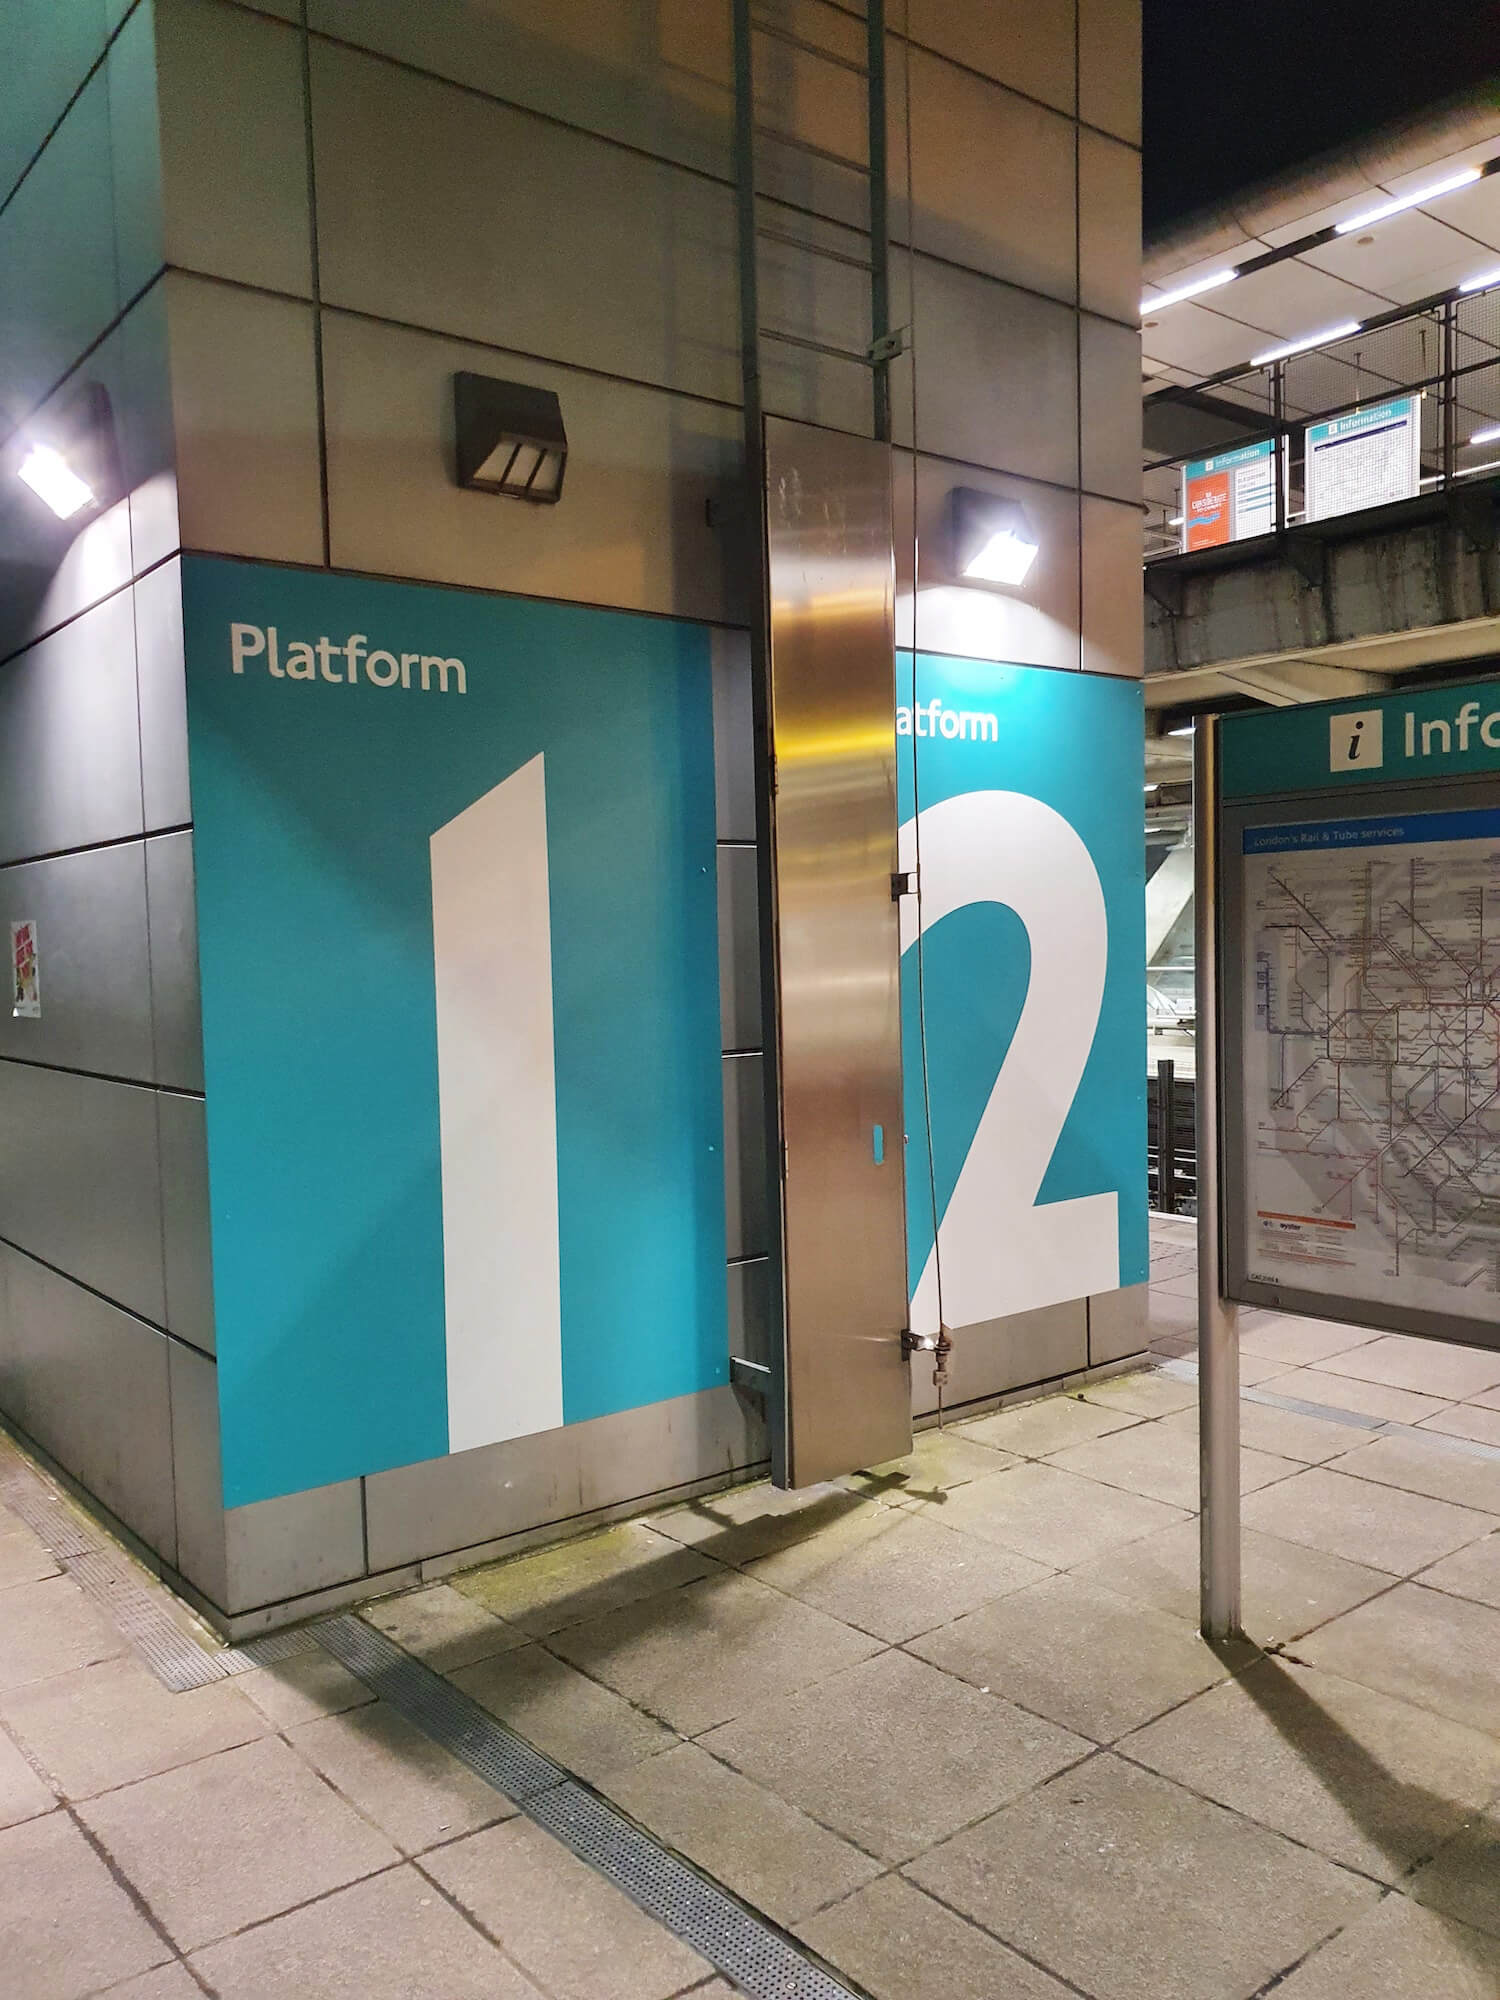 Platform Signs at Canning Town Station